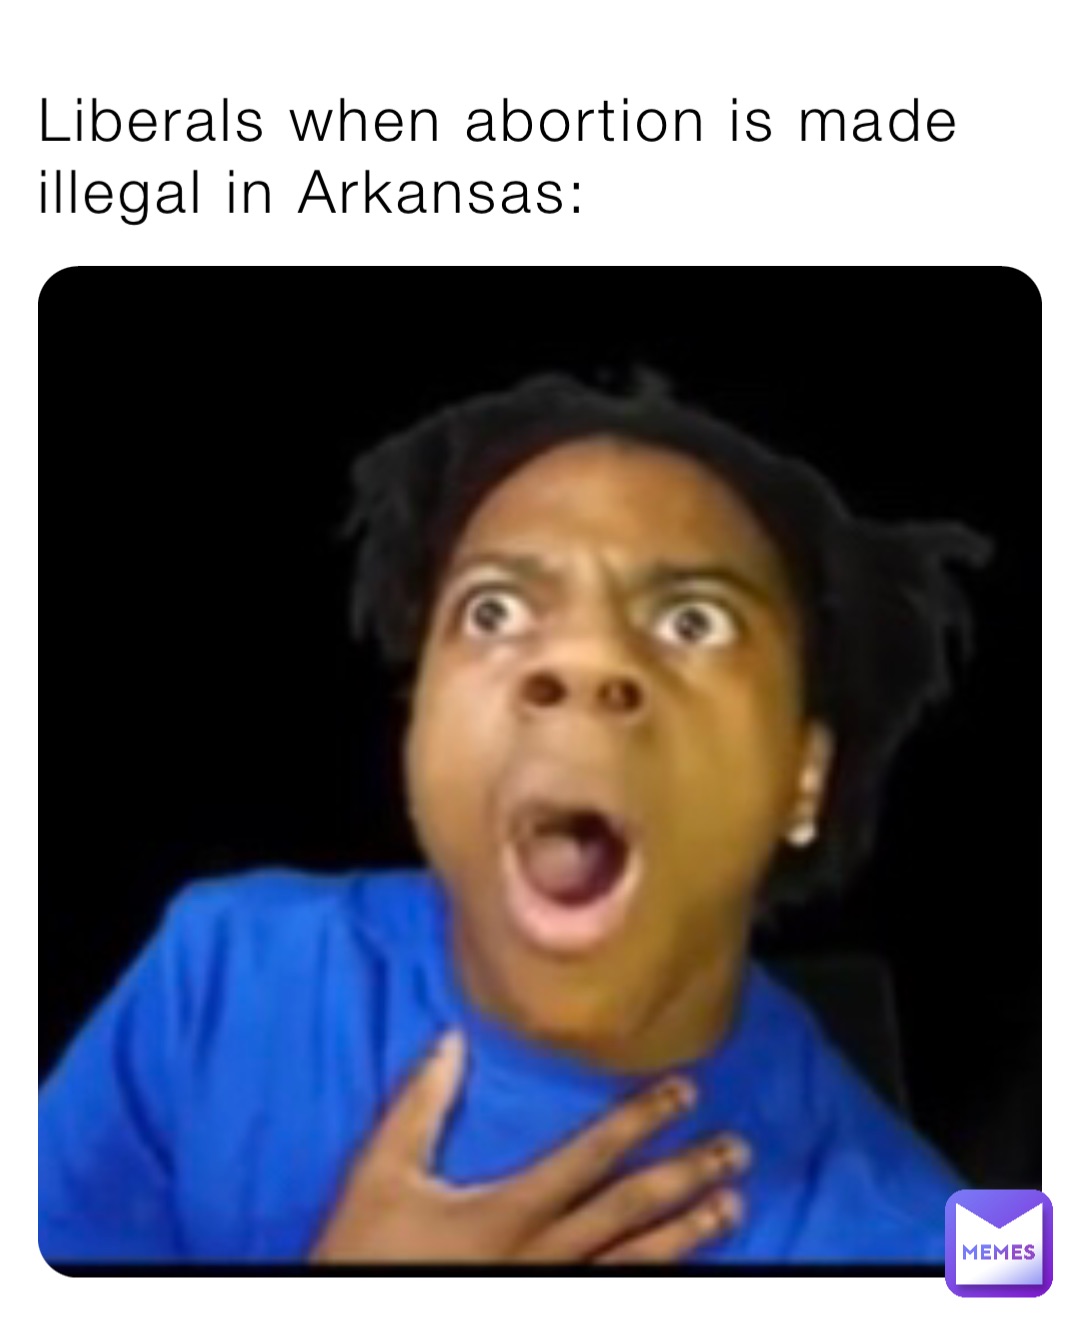 Liberals when abortion is made illegal in Arkansas: